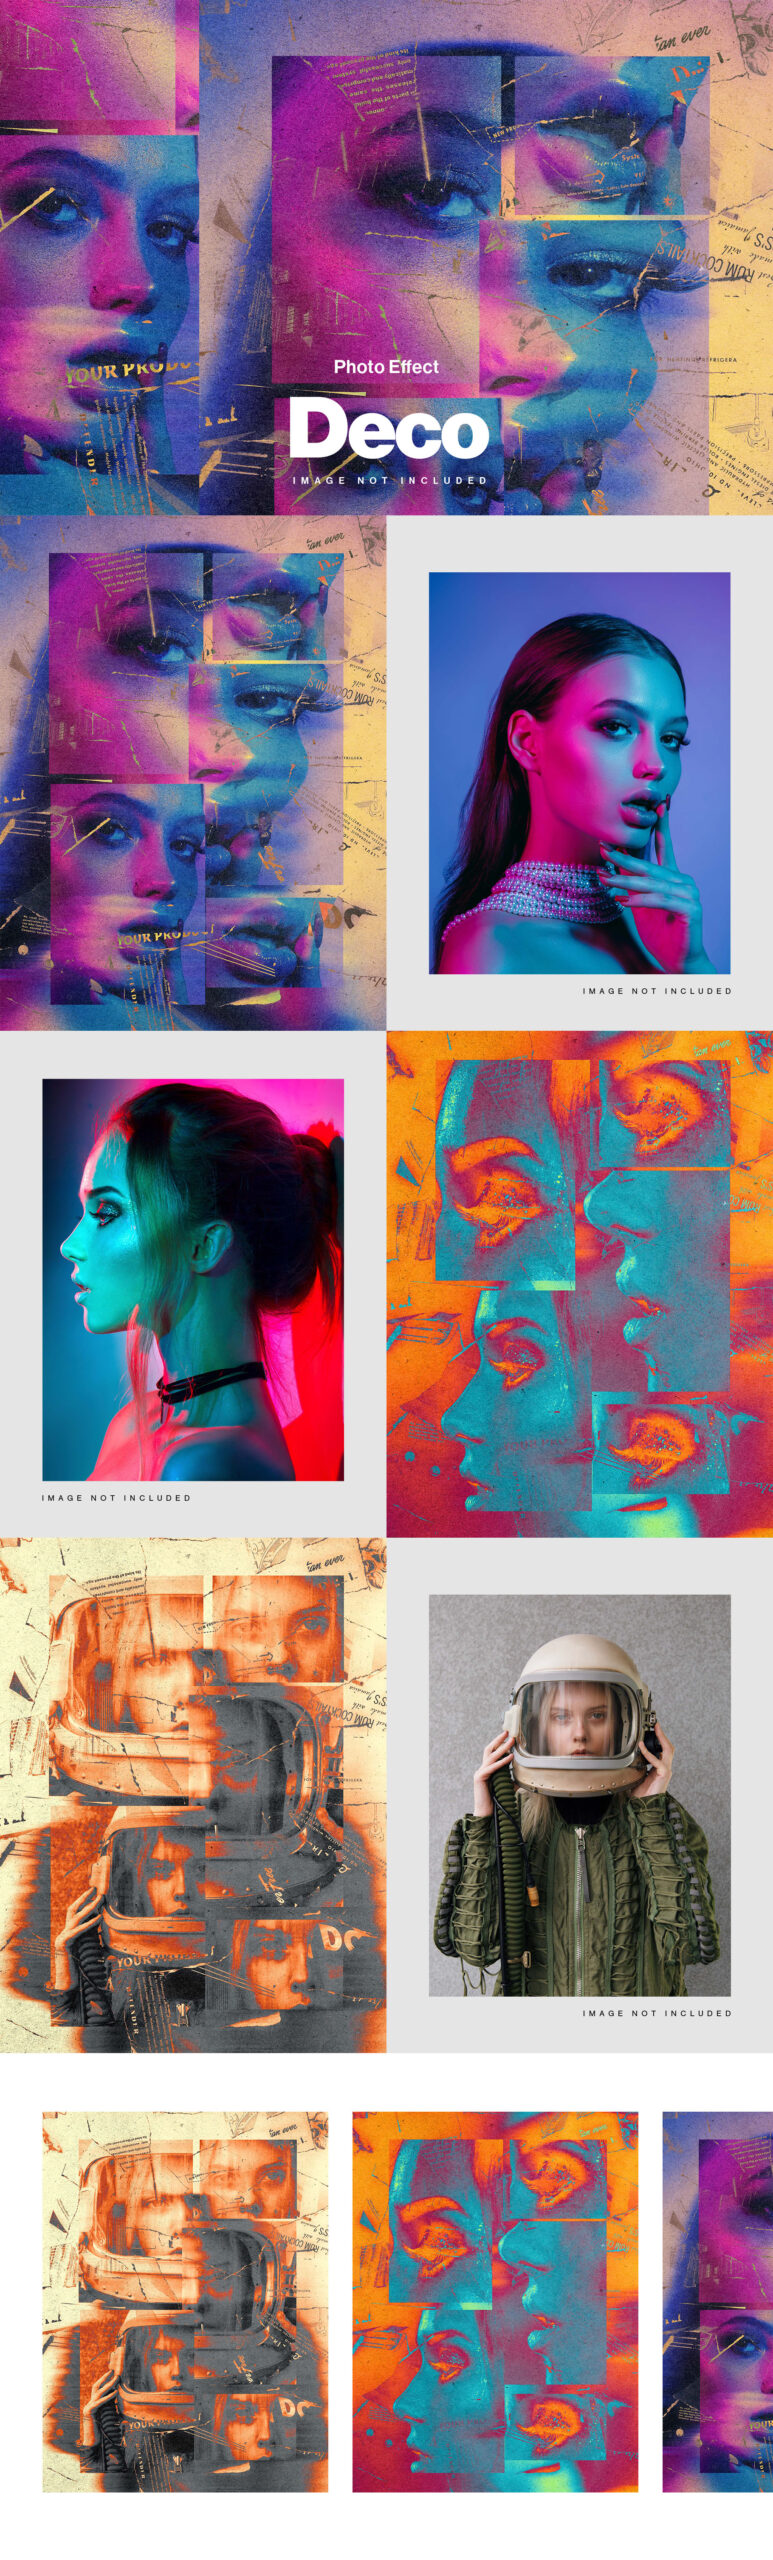 Deco Abstract Artist Photo Effect in PSD format